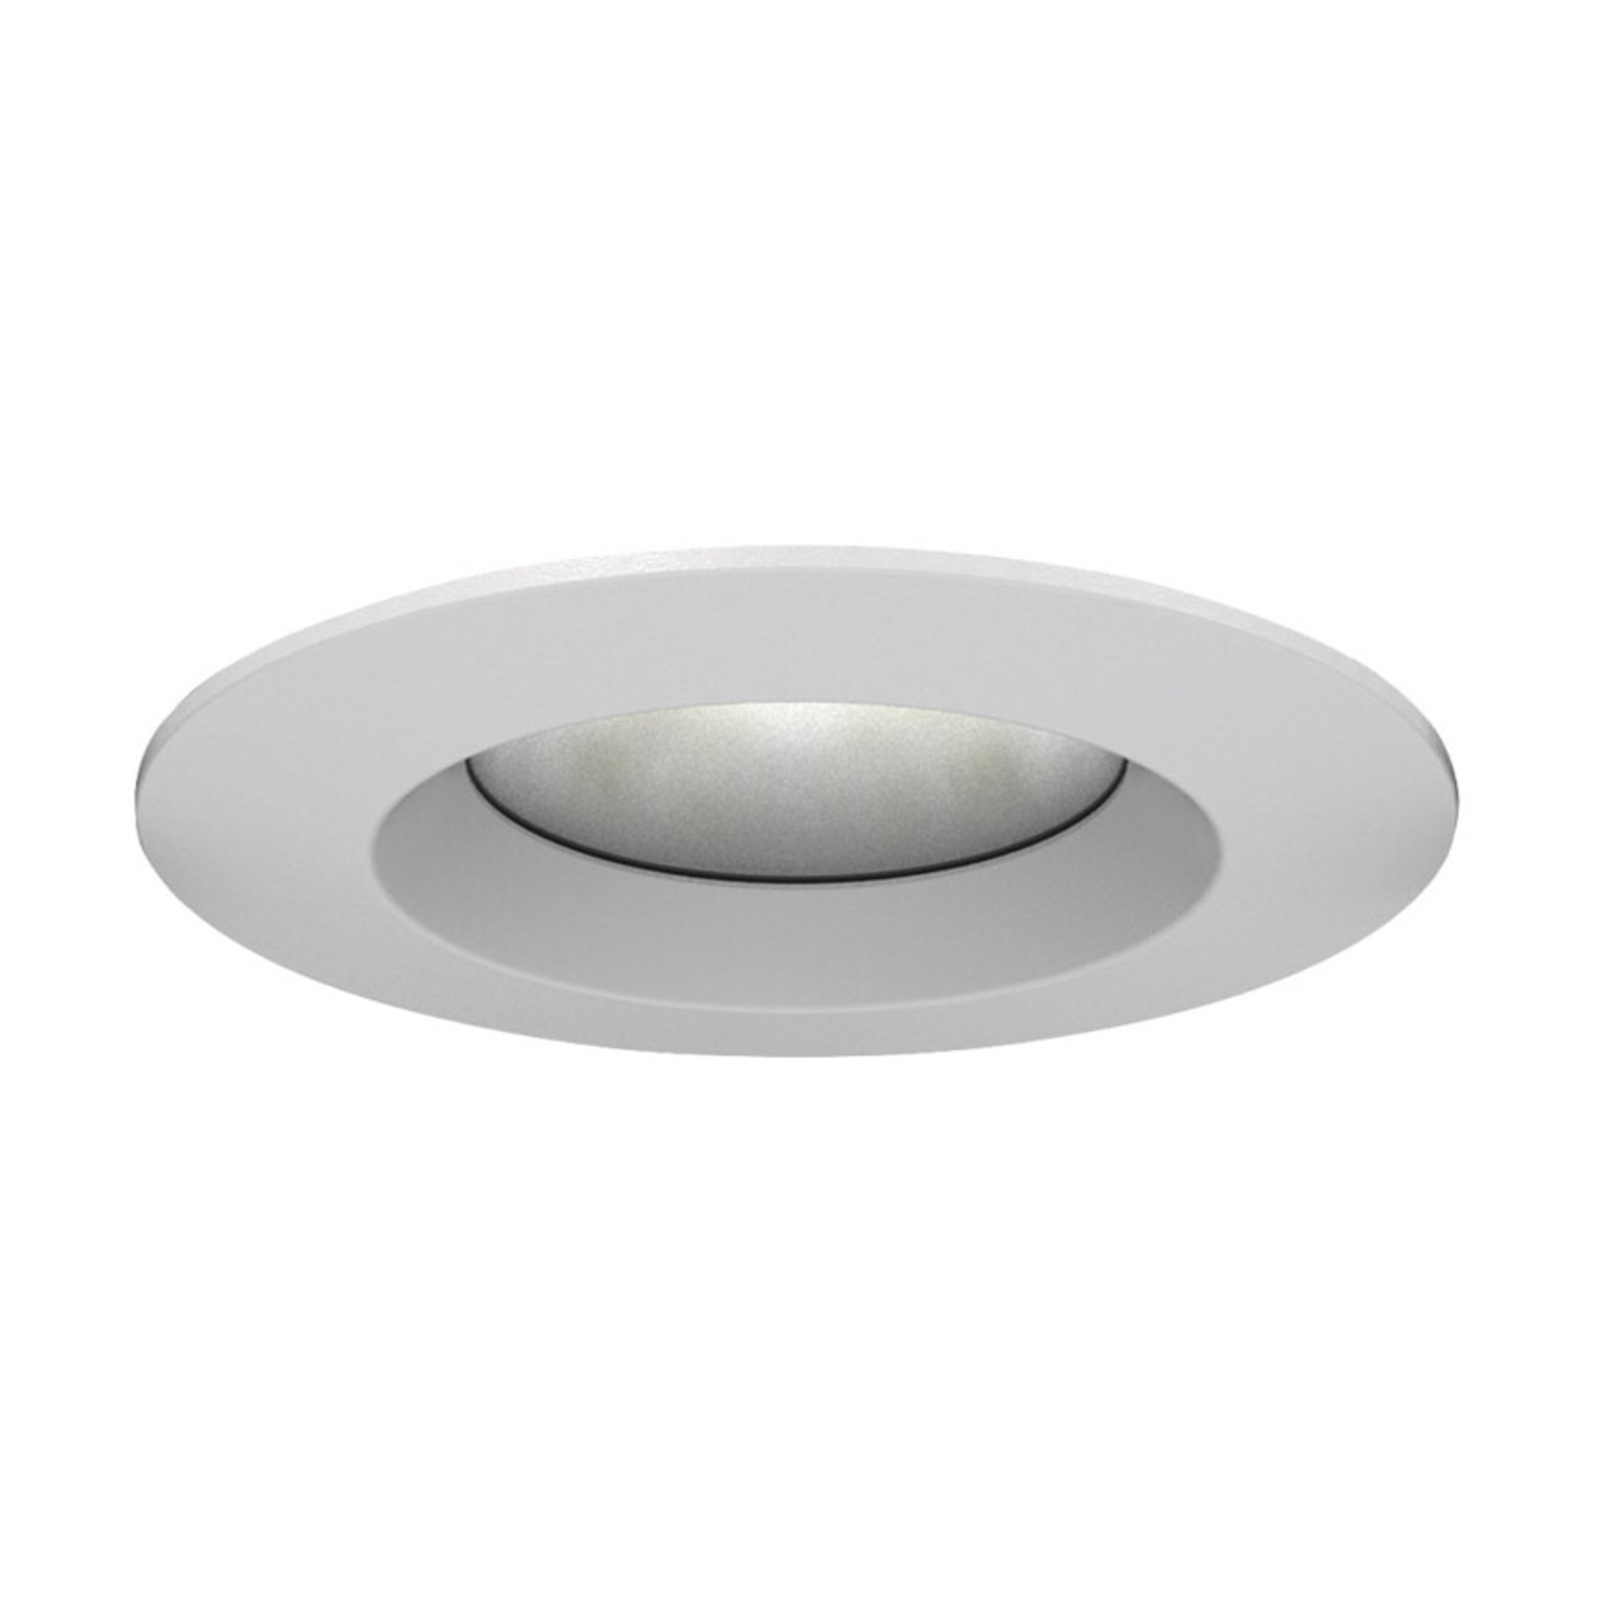 Siteco Lunis 40 IP65 LED downlight dimmable Ø8.3cm